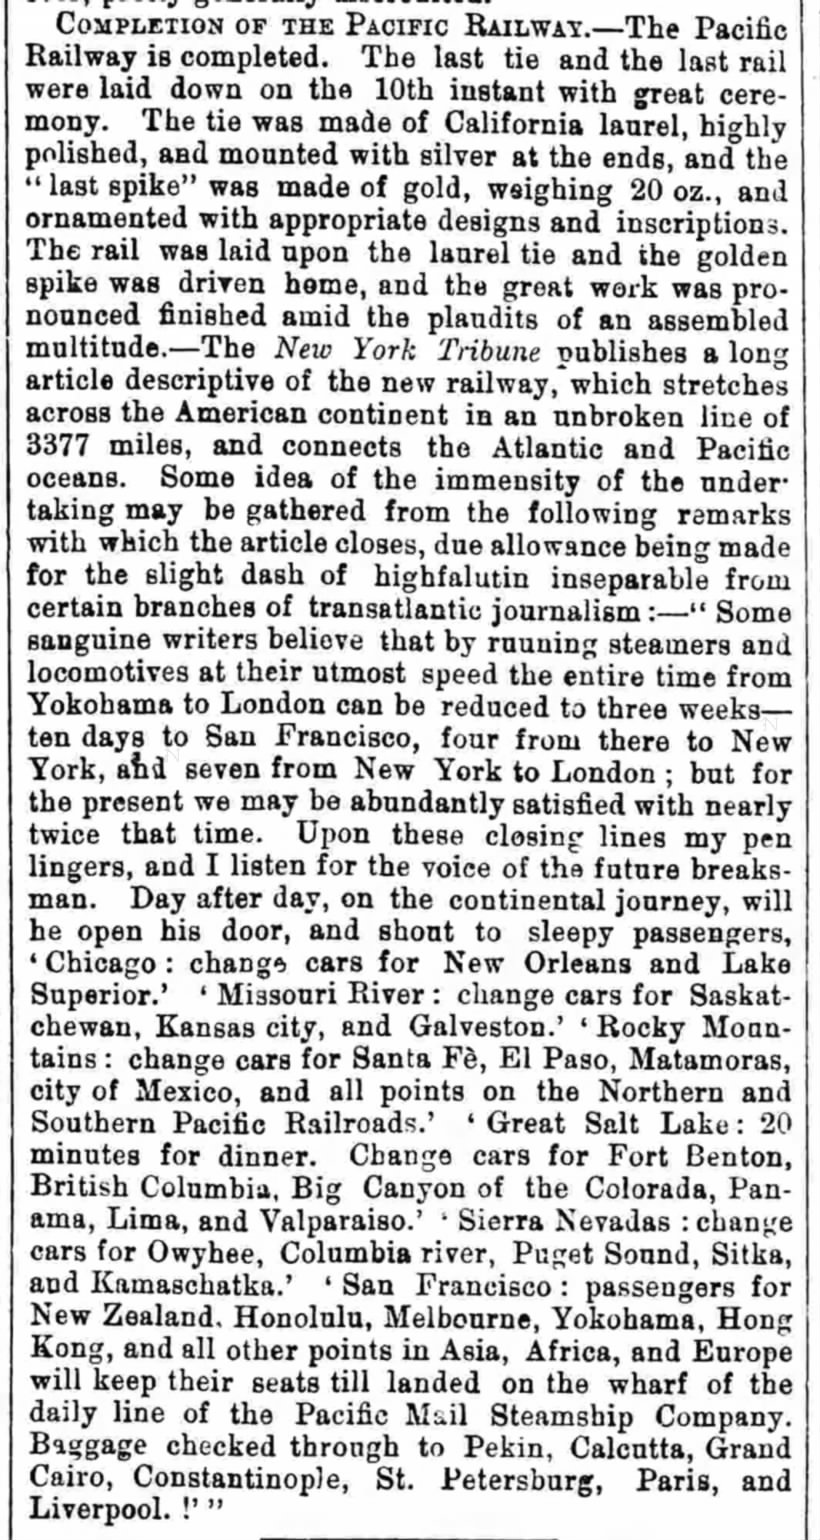 British newspaper carries news that the building of the Transcontinental Railroad is finished